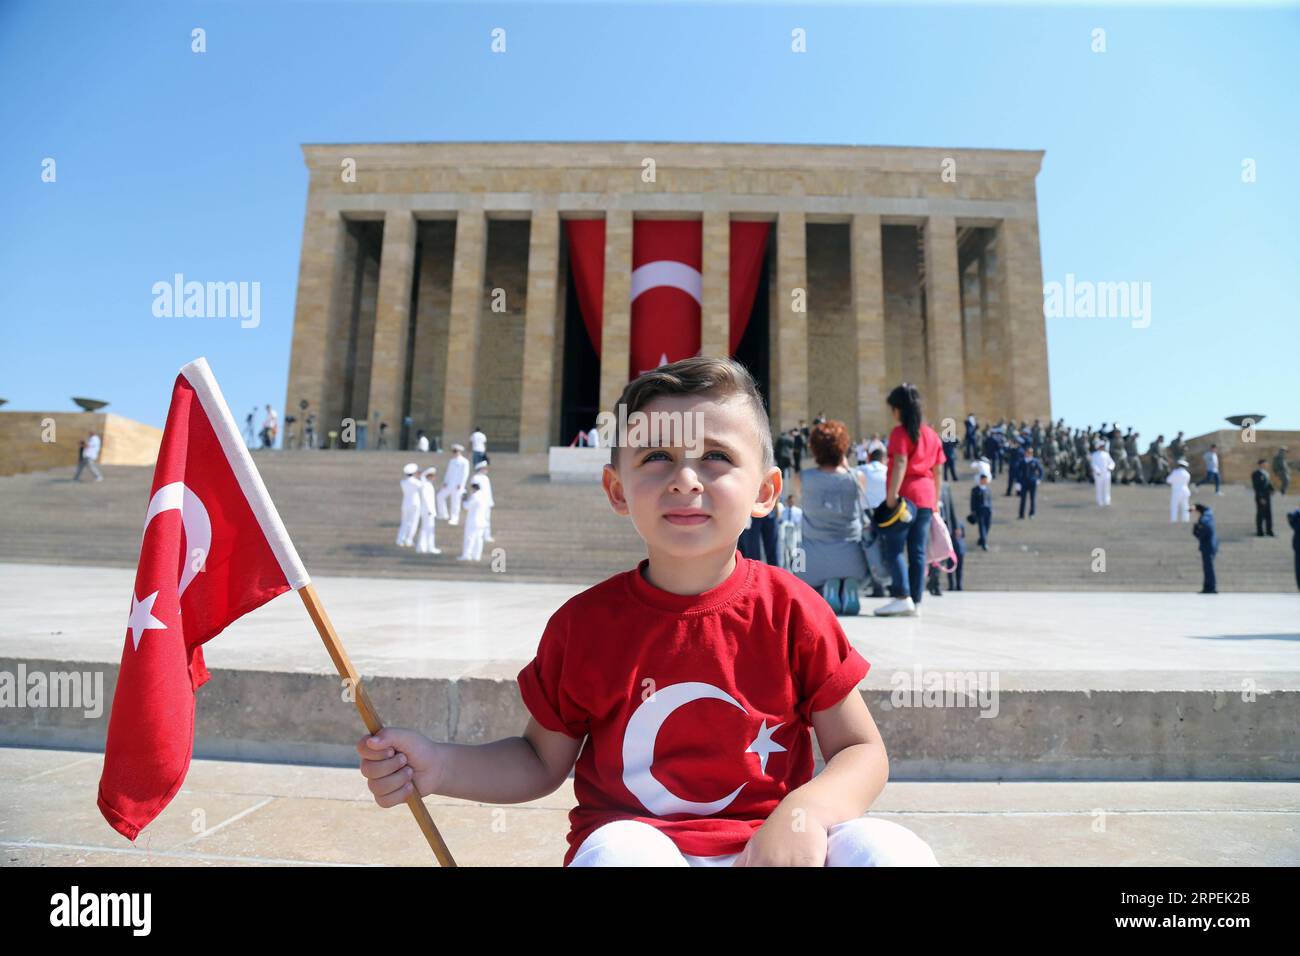 (190830) -- ANKARA, Aug. 30, 2019 -- A Turkish kid celebrates the 97th anniversary of Victory Day at the Ataturk Mausoleum in Ankara, Turkey, Aug. 30, 2019. Turkey marked on Friday the 97th anniversary of Victory Day, the day the Turks defeated the Greek forces at the Battle of Dumlupinar, the final battle of the Turkish War of Independence in 1922. (Photo by /Xinhua) TURKEY-ANKARA-VICTORY DAY MustafaxKaya PUBLICATIONxNOTxINxCHN Stock Photo